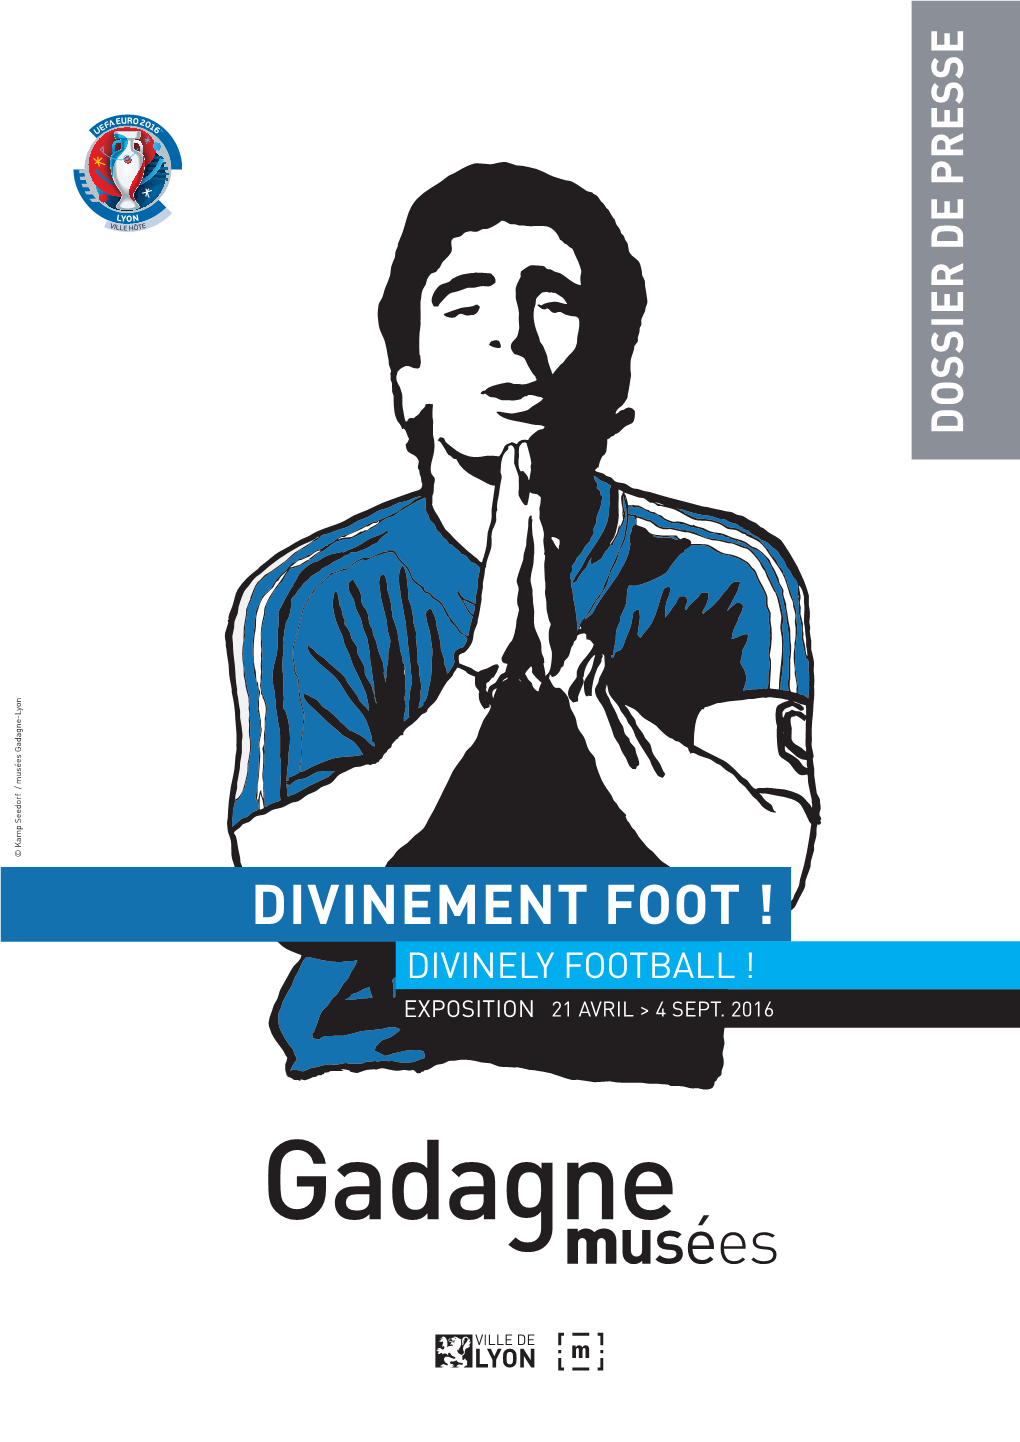 Divinement Foot ! Divinely Football ! Exposition 21 Avril > 4 Sept